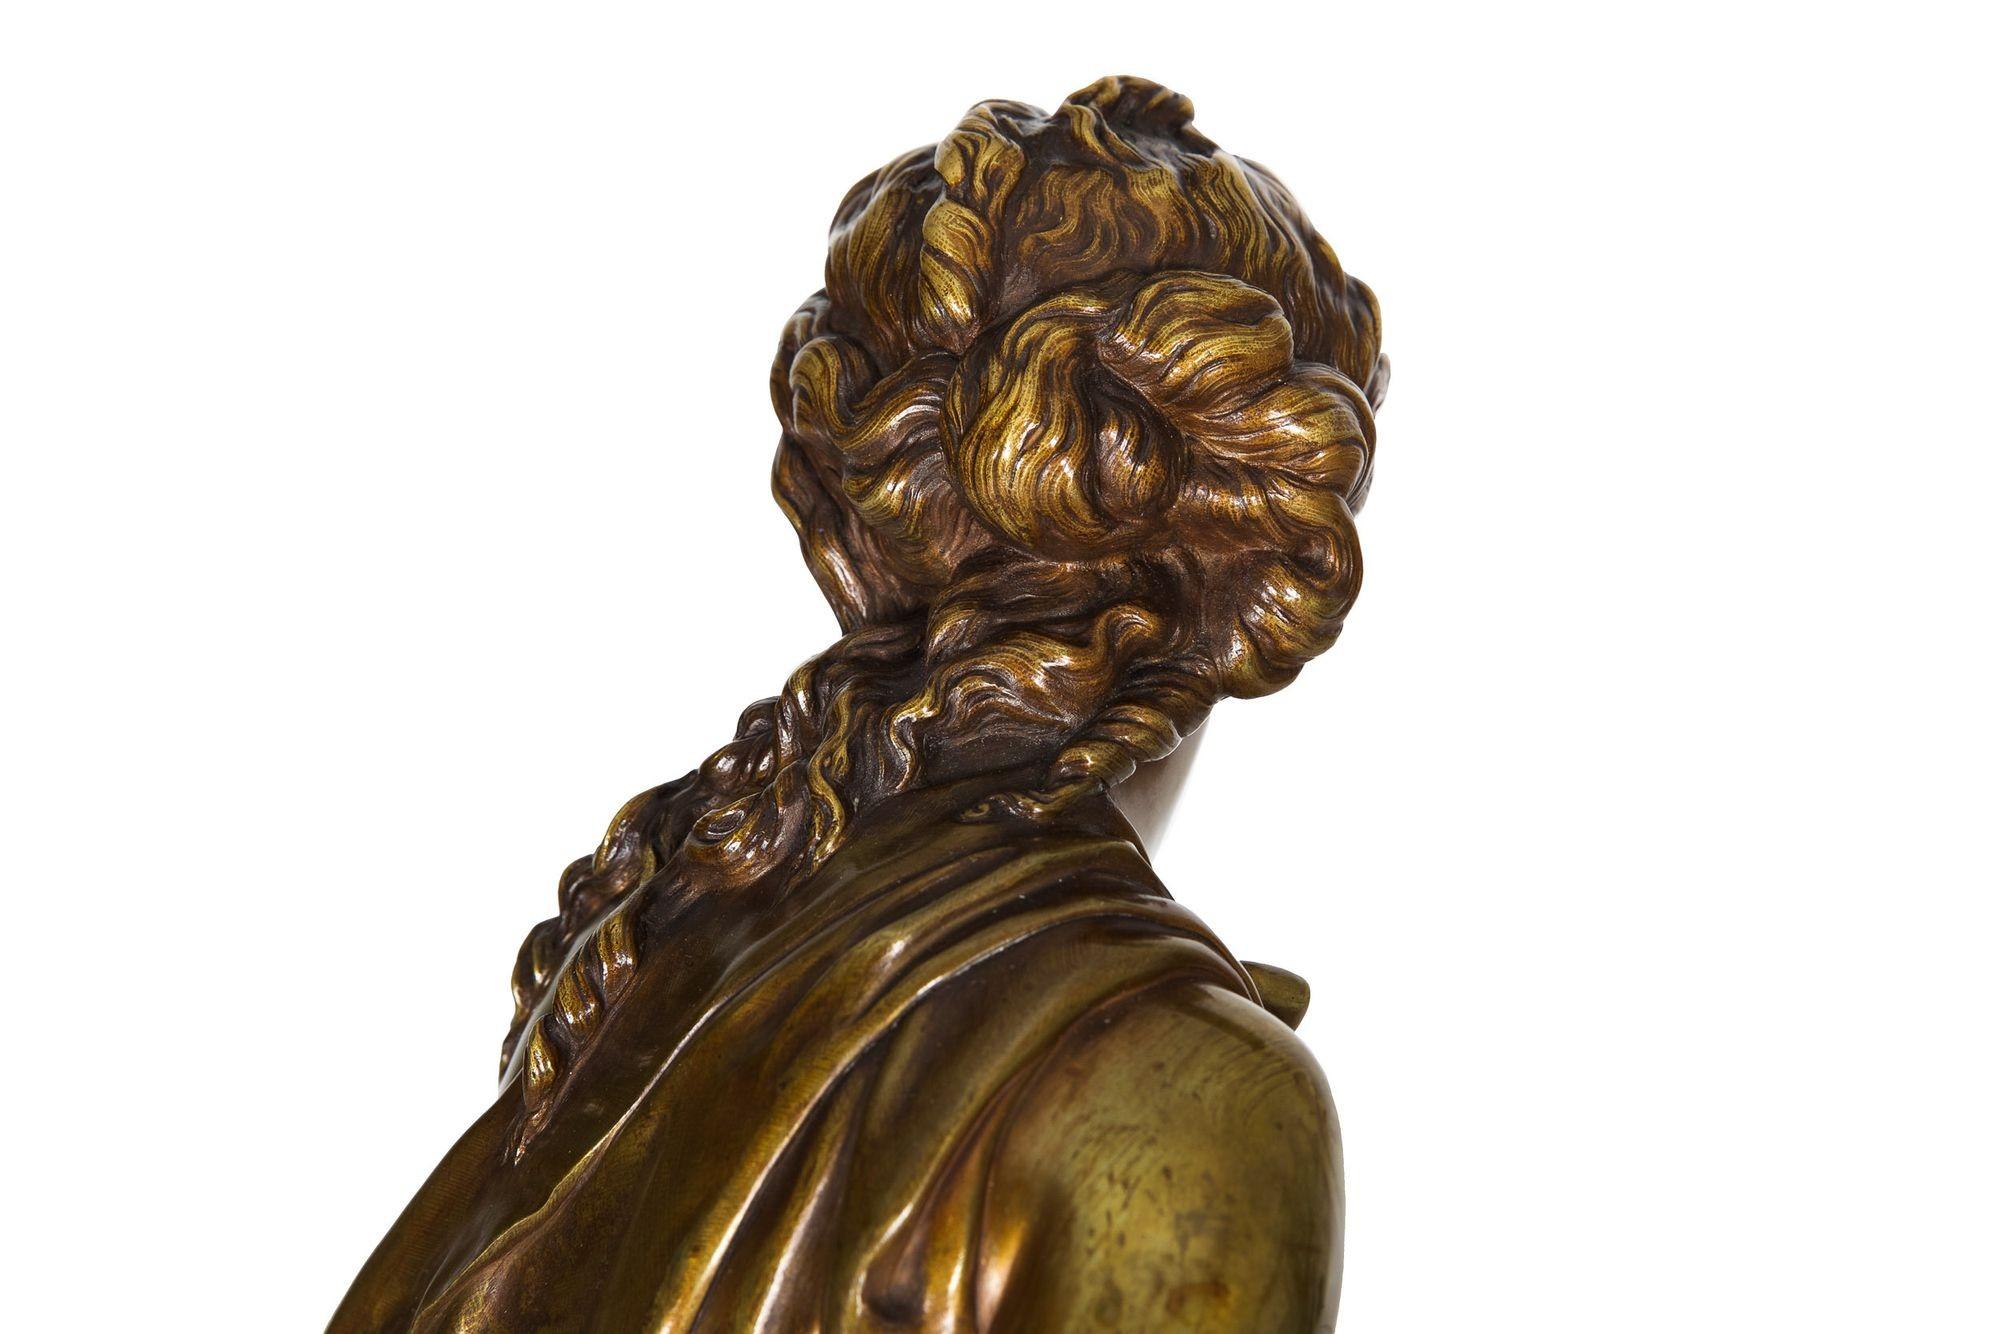 French Antique Bronze Sculpture “Seated Woman” by Etienne-Henri Dumaige, c.1880 For Sale 2